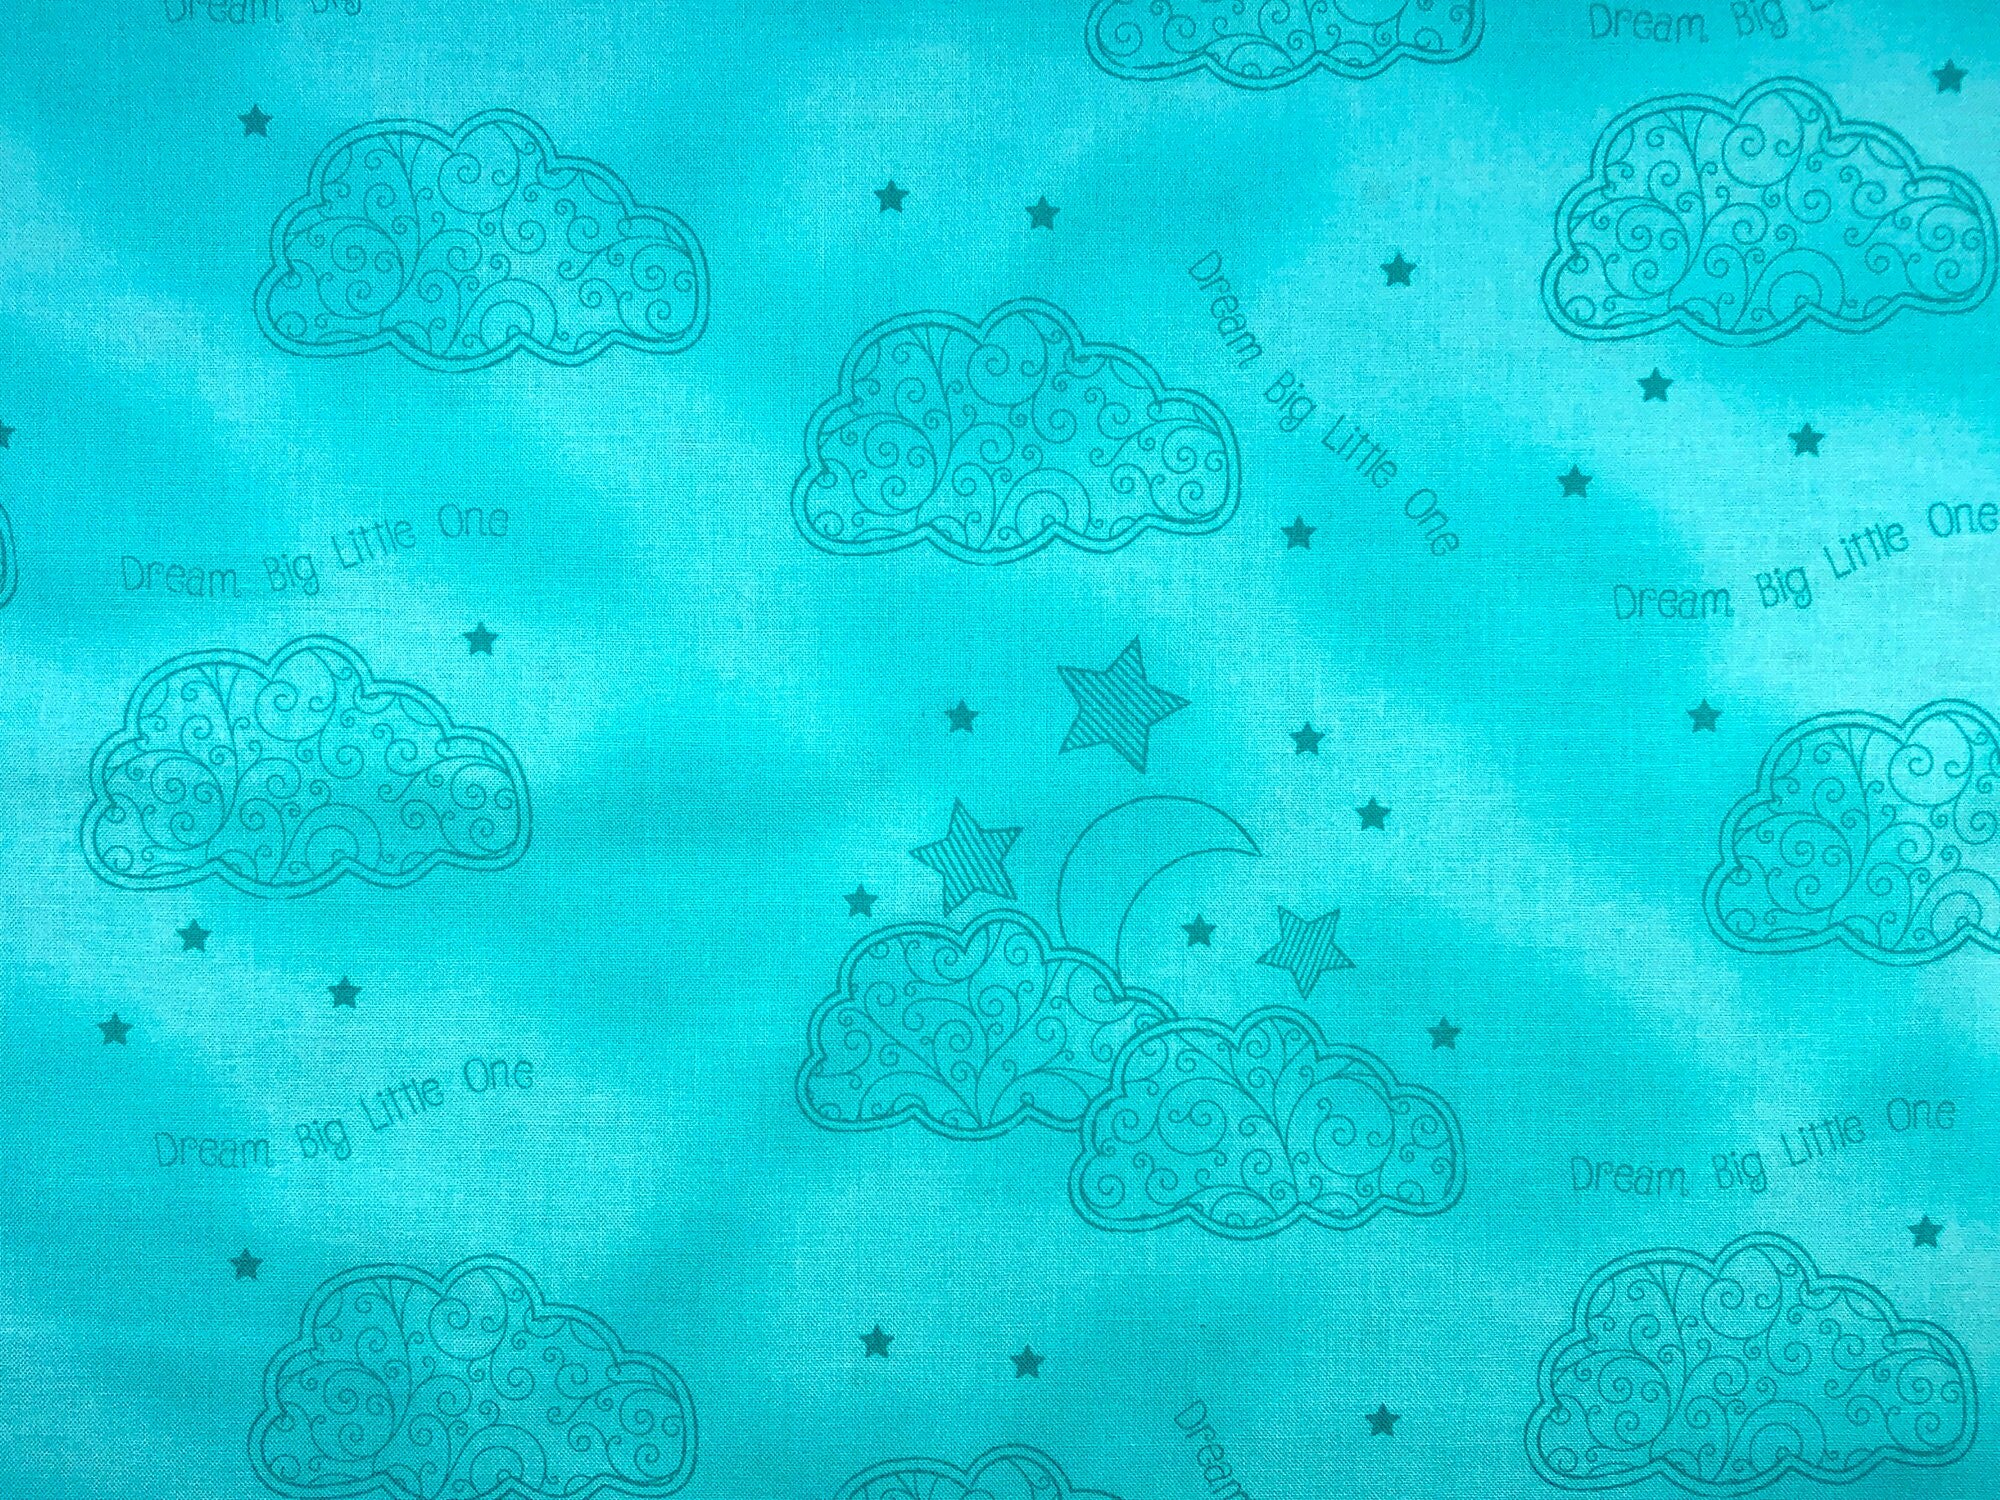 This teal green fabric is covered with clouds, moons and stars. The saying Dream Big Little One is also printed throughout the fabric